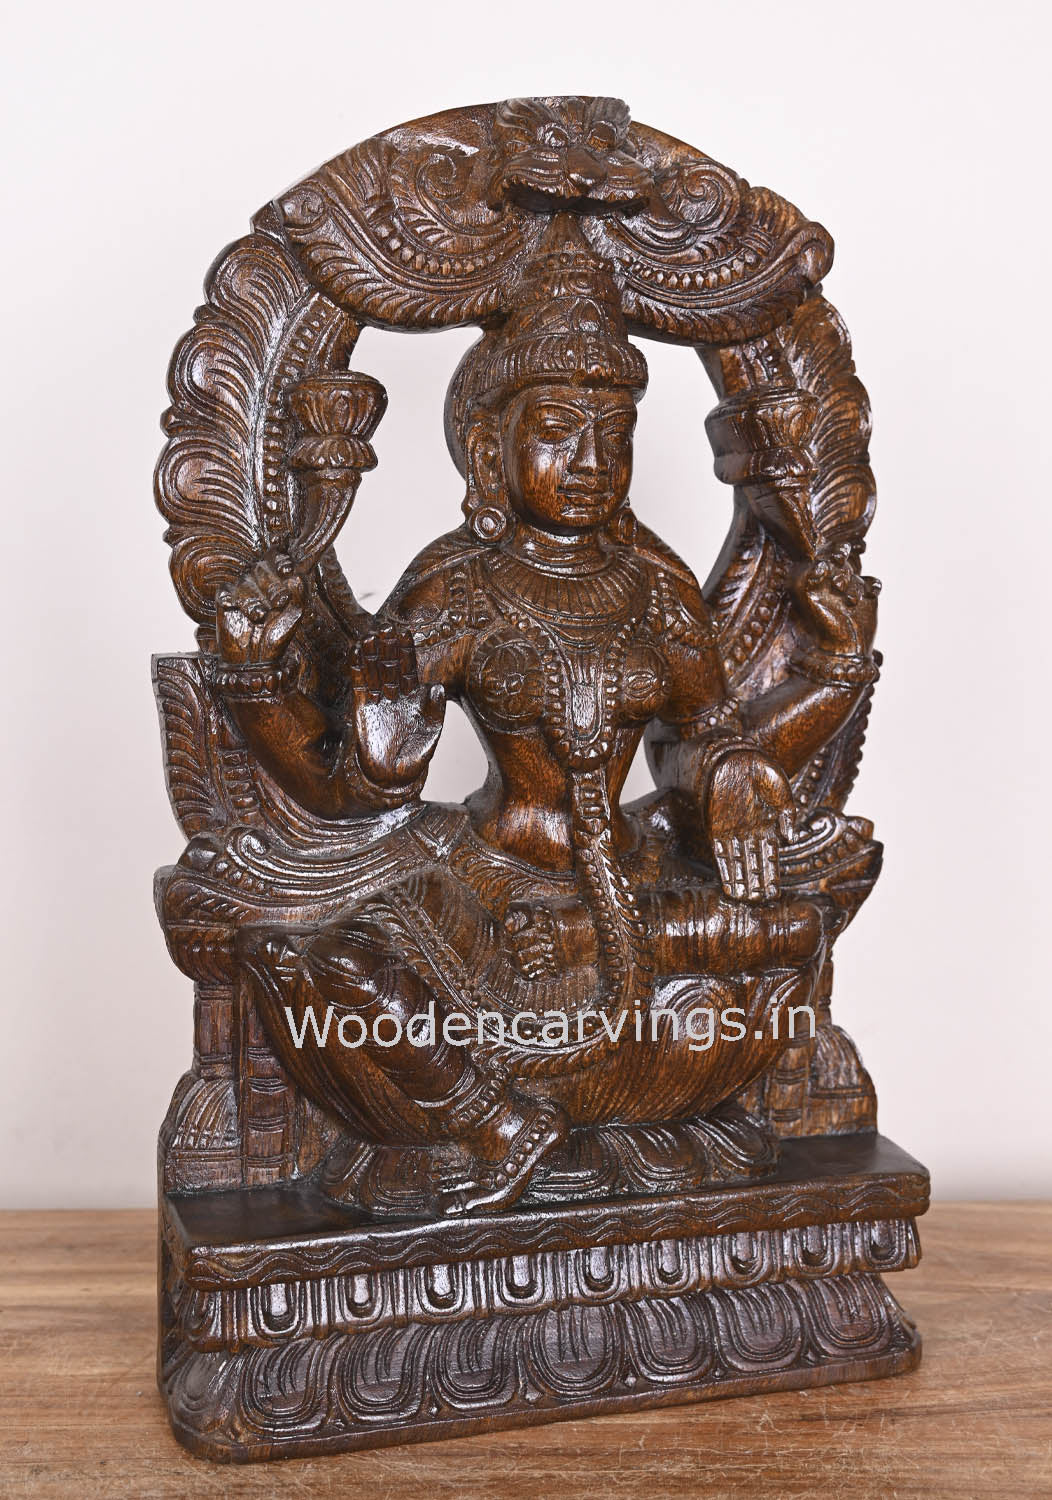 Arch Blessing MahaLakshmi on Lotus Blessing Wooden Polished Showpiece Polished Sculpture 19"